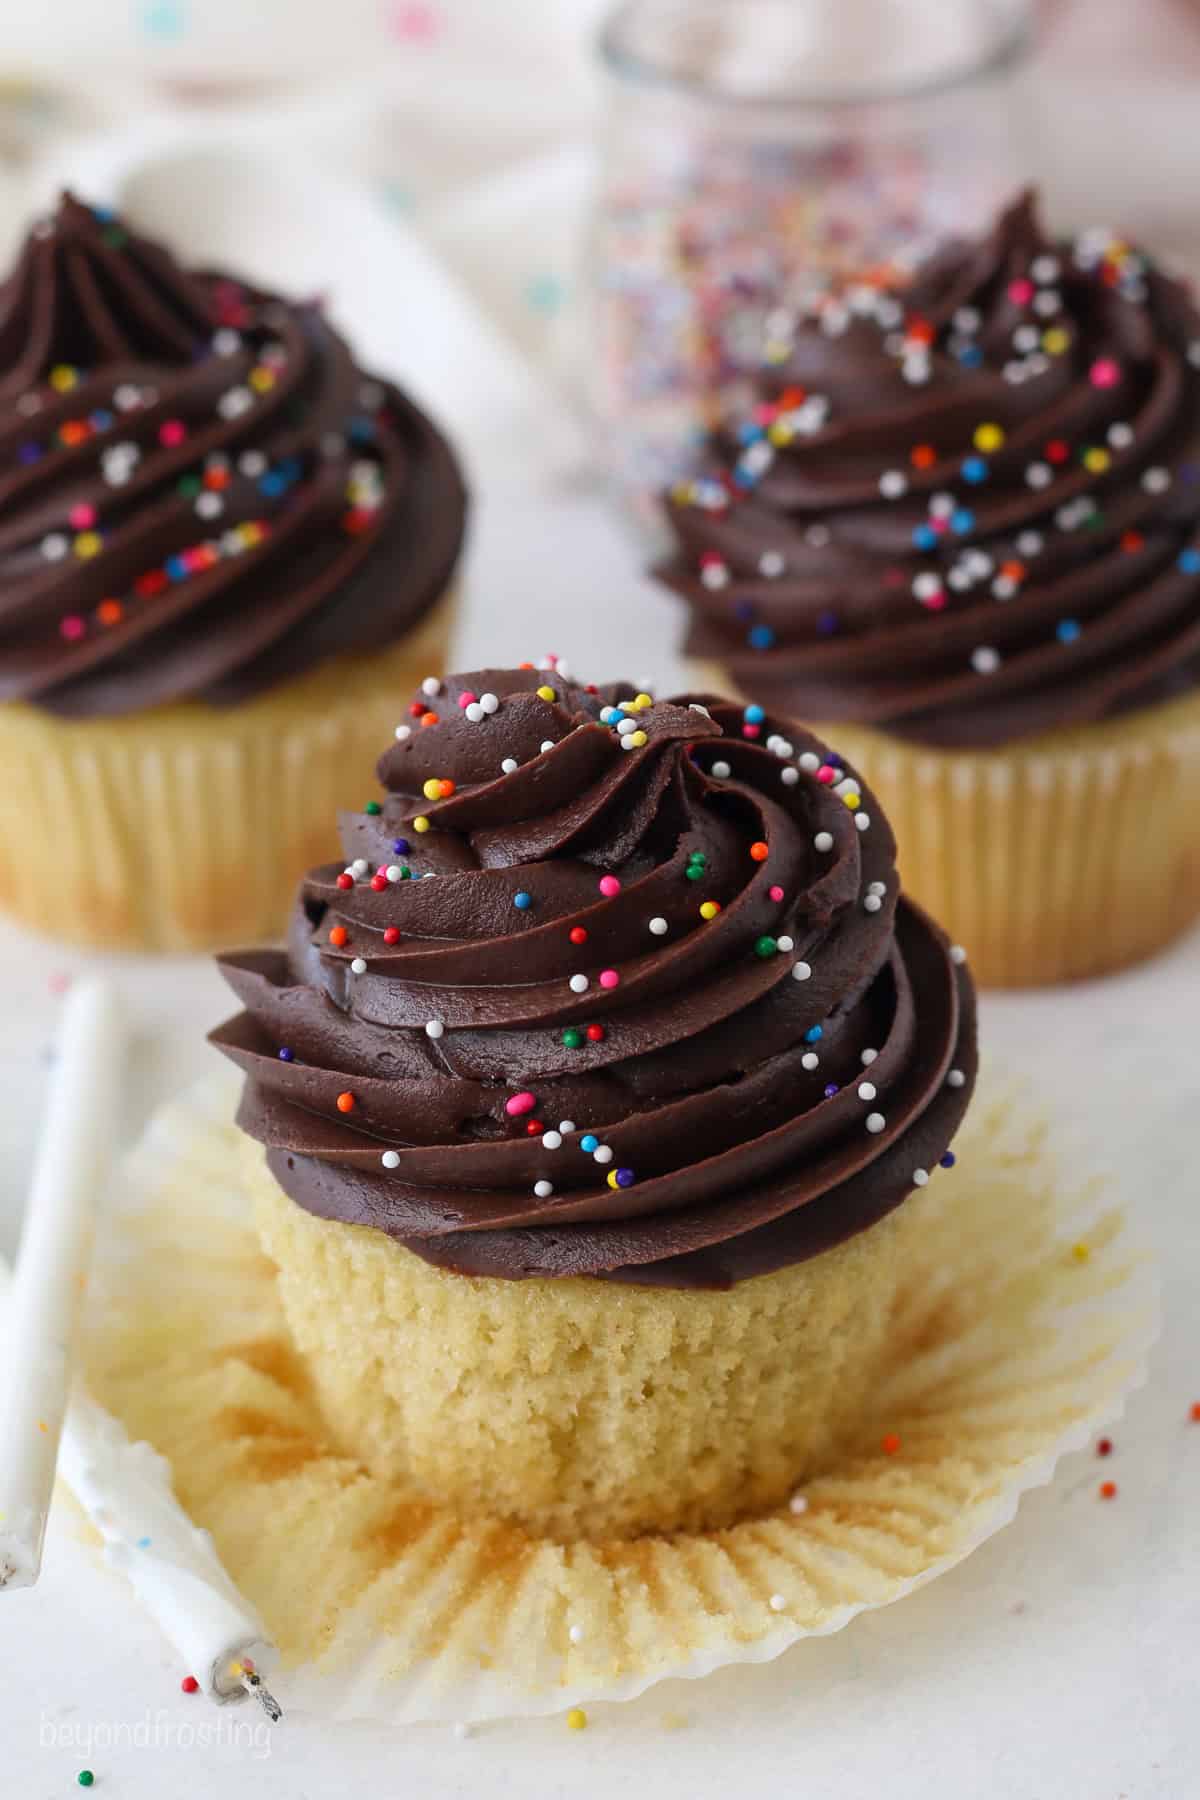 Close up of a yellow cupcake decorated with chocolate frosting and sprinkles in an open cupcake wrapper, with more cupcakes in the background.